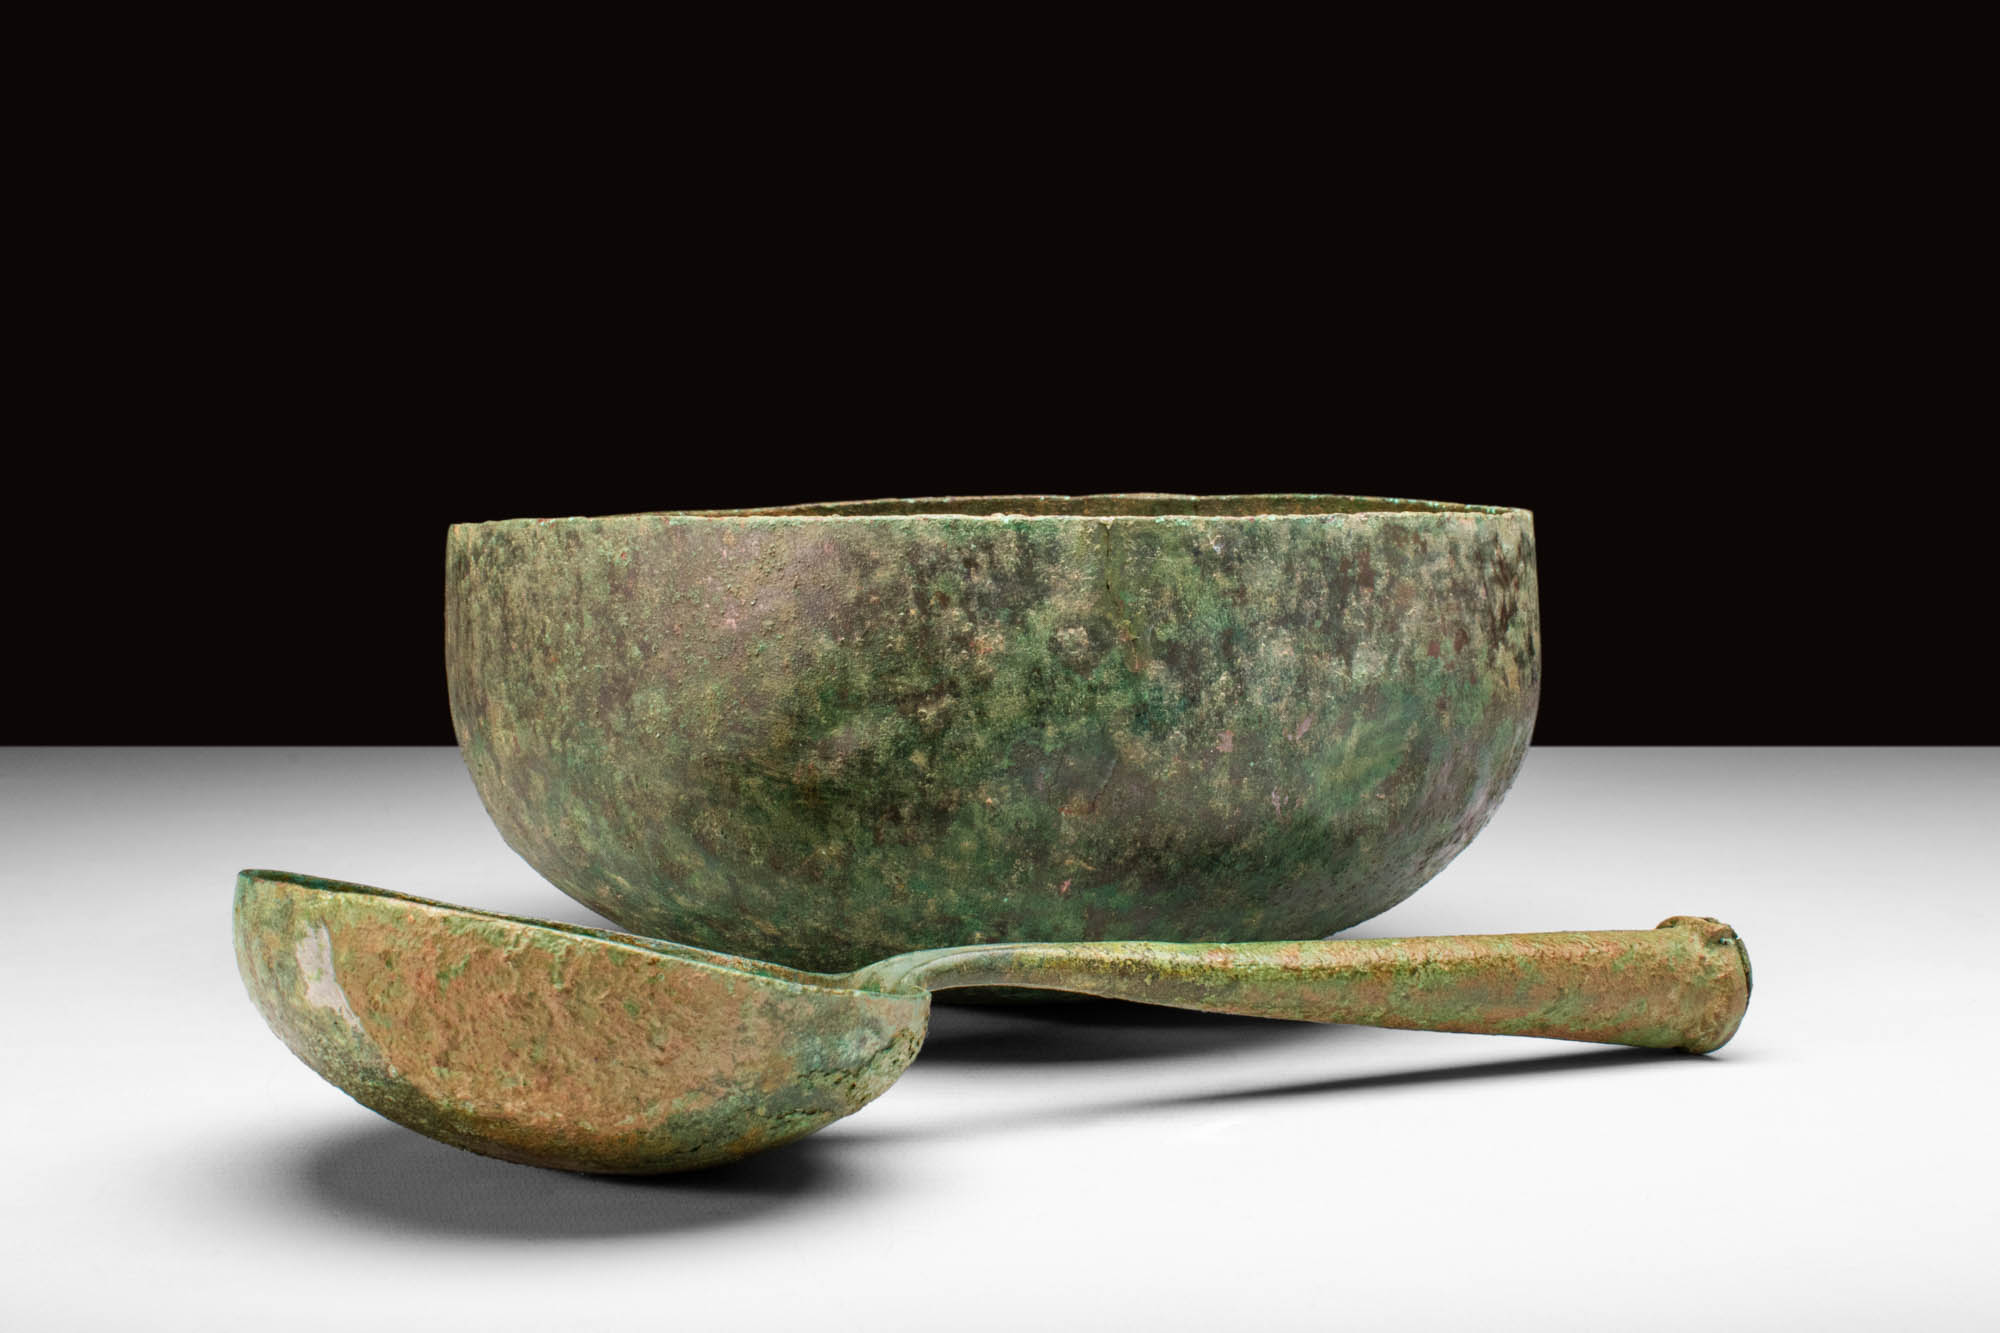 SET OF ETRUSCAN BRONZE BOWL AND LARGE SPOON - Image 2 of 3